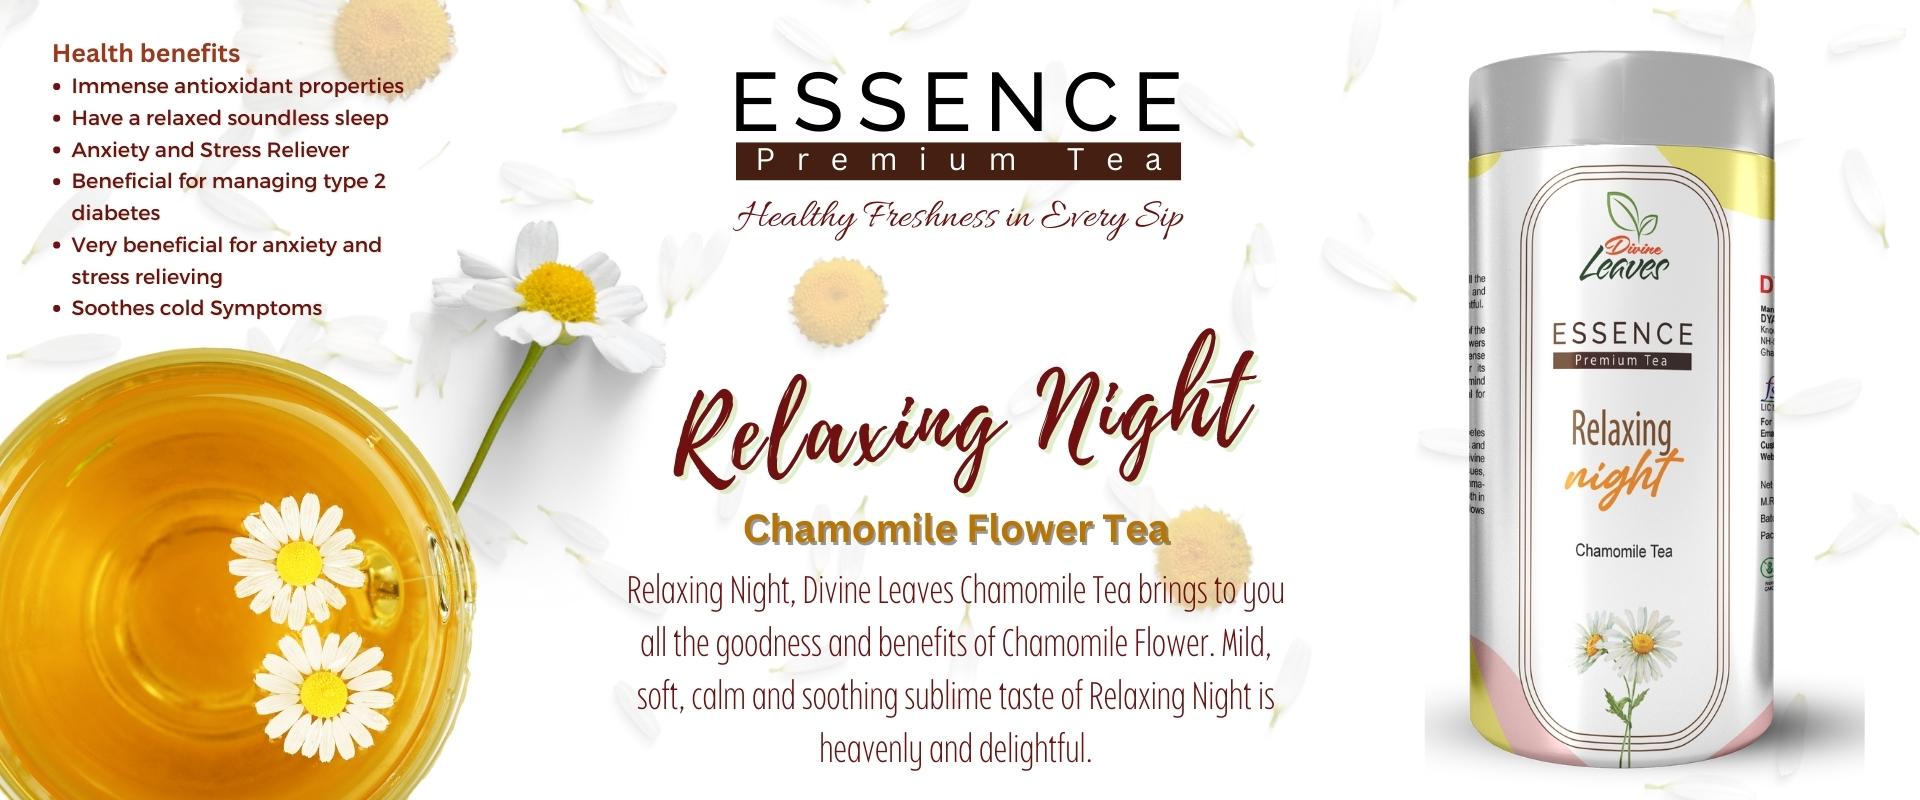  Chamomile Herbal Tea Immense antioxidant, Have a relaxed soundless sleep, anxiety and stress reliver